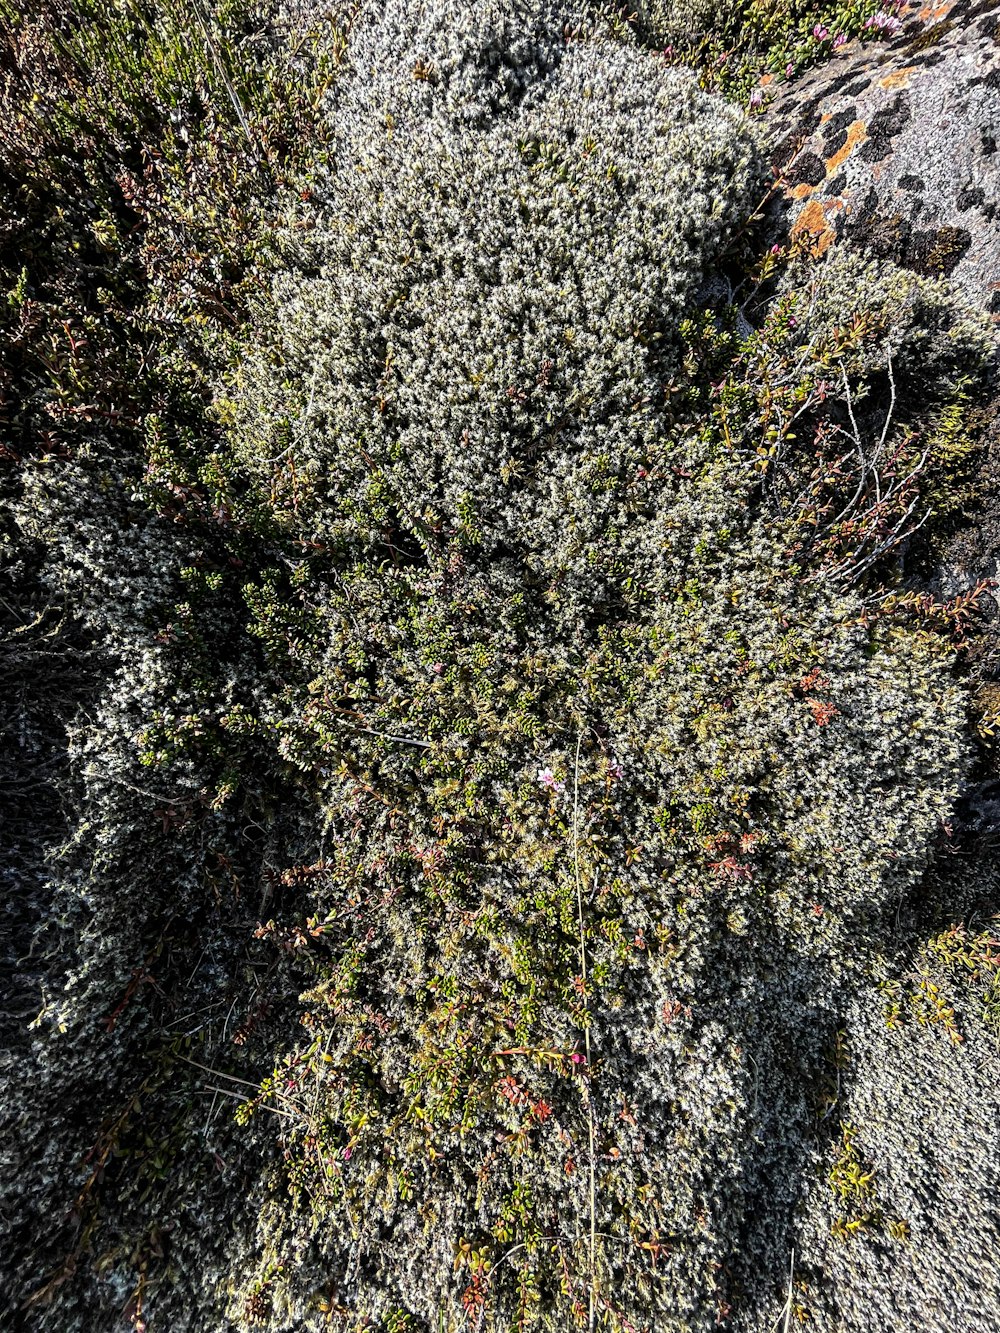 a small patch of grass growing on a rock